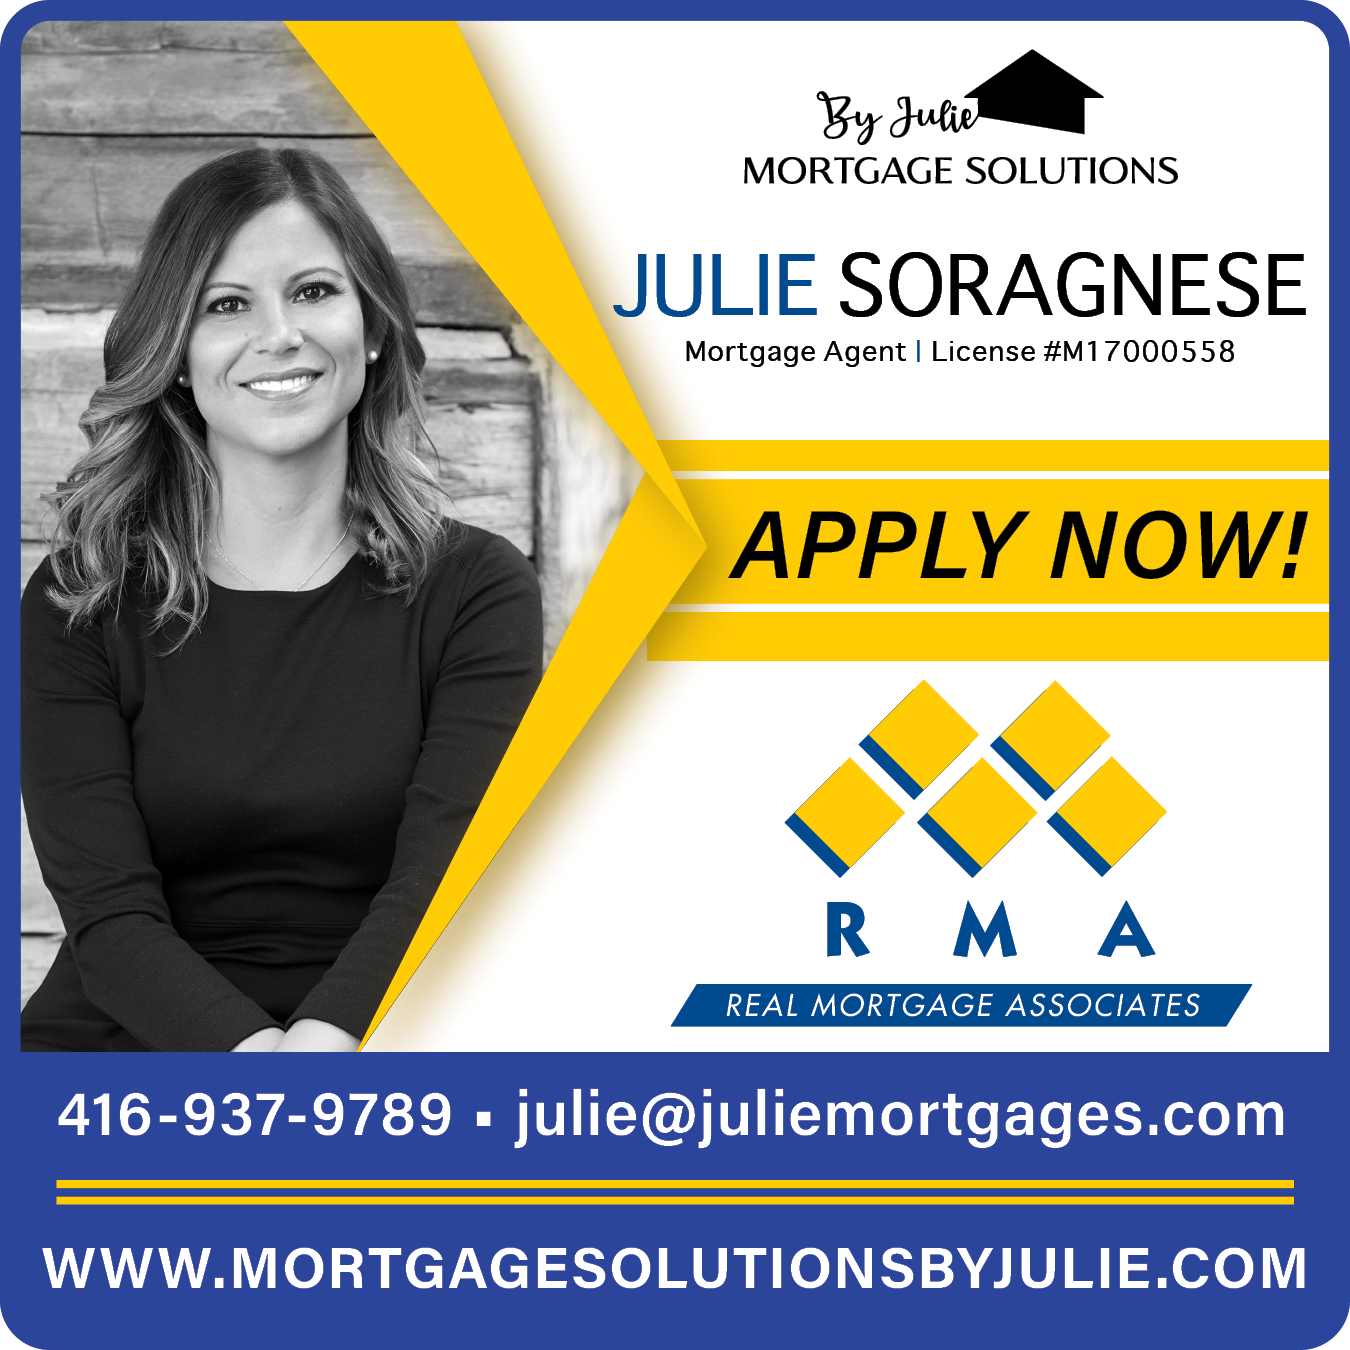 Mortgage Solutions By Julie